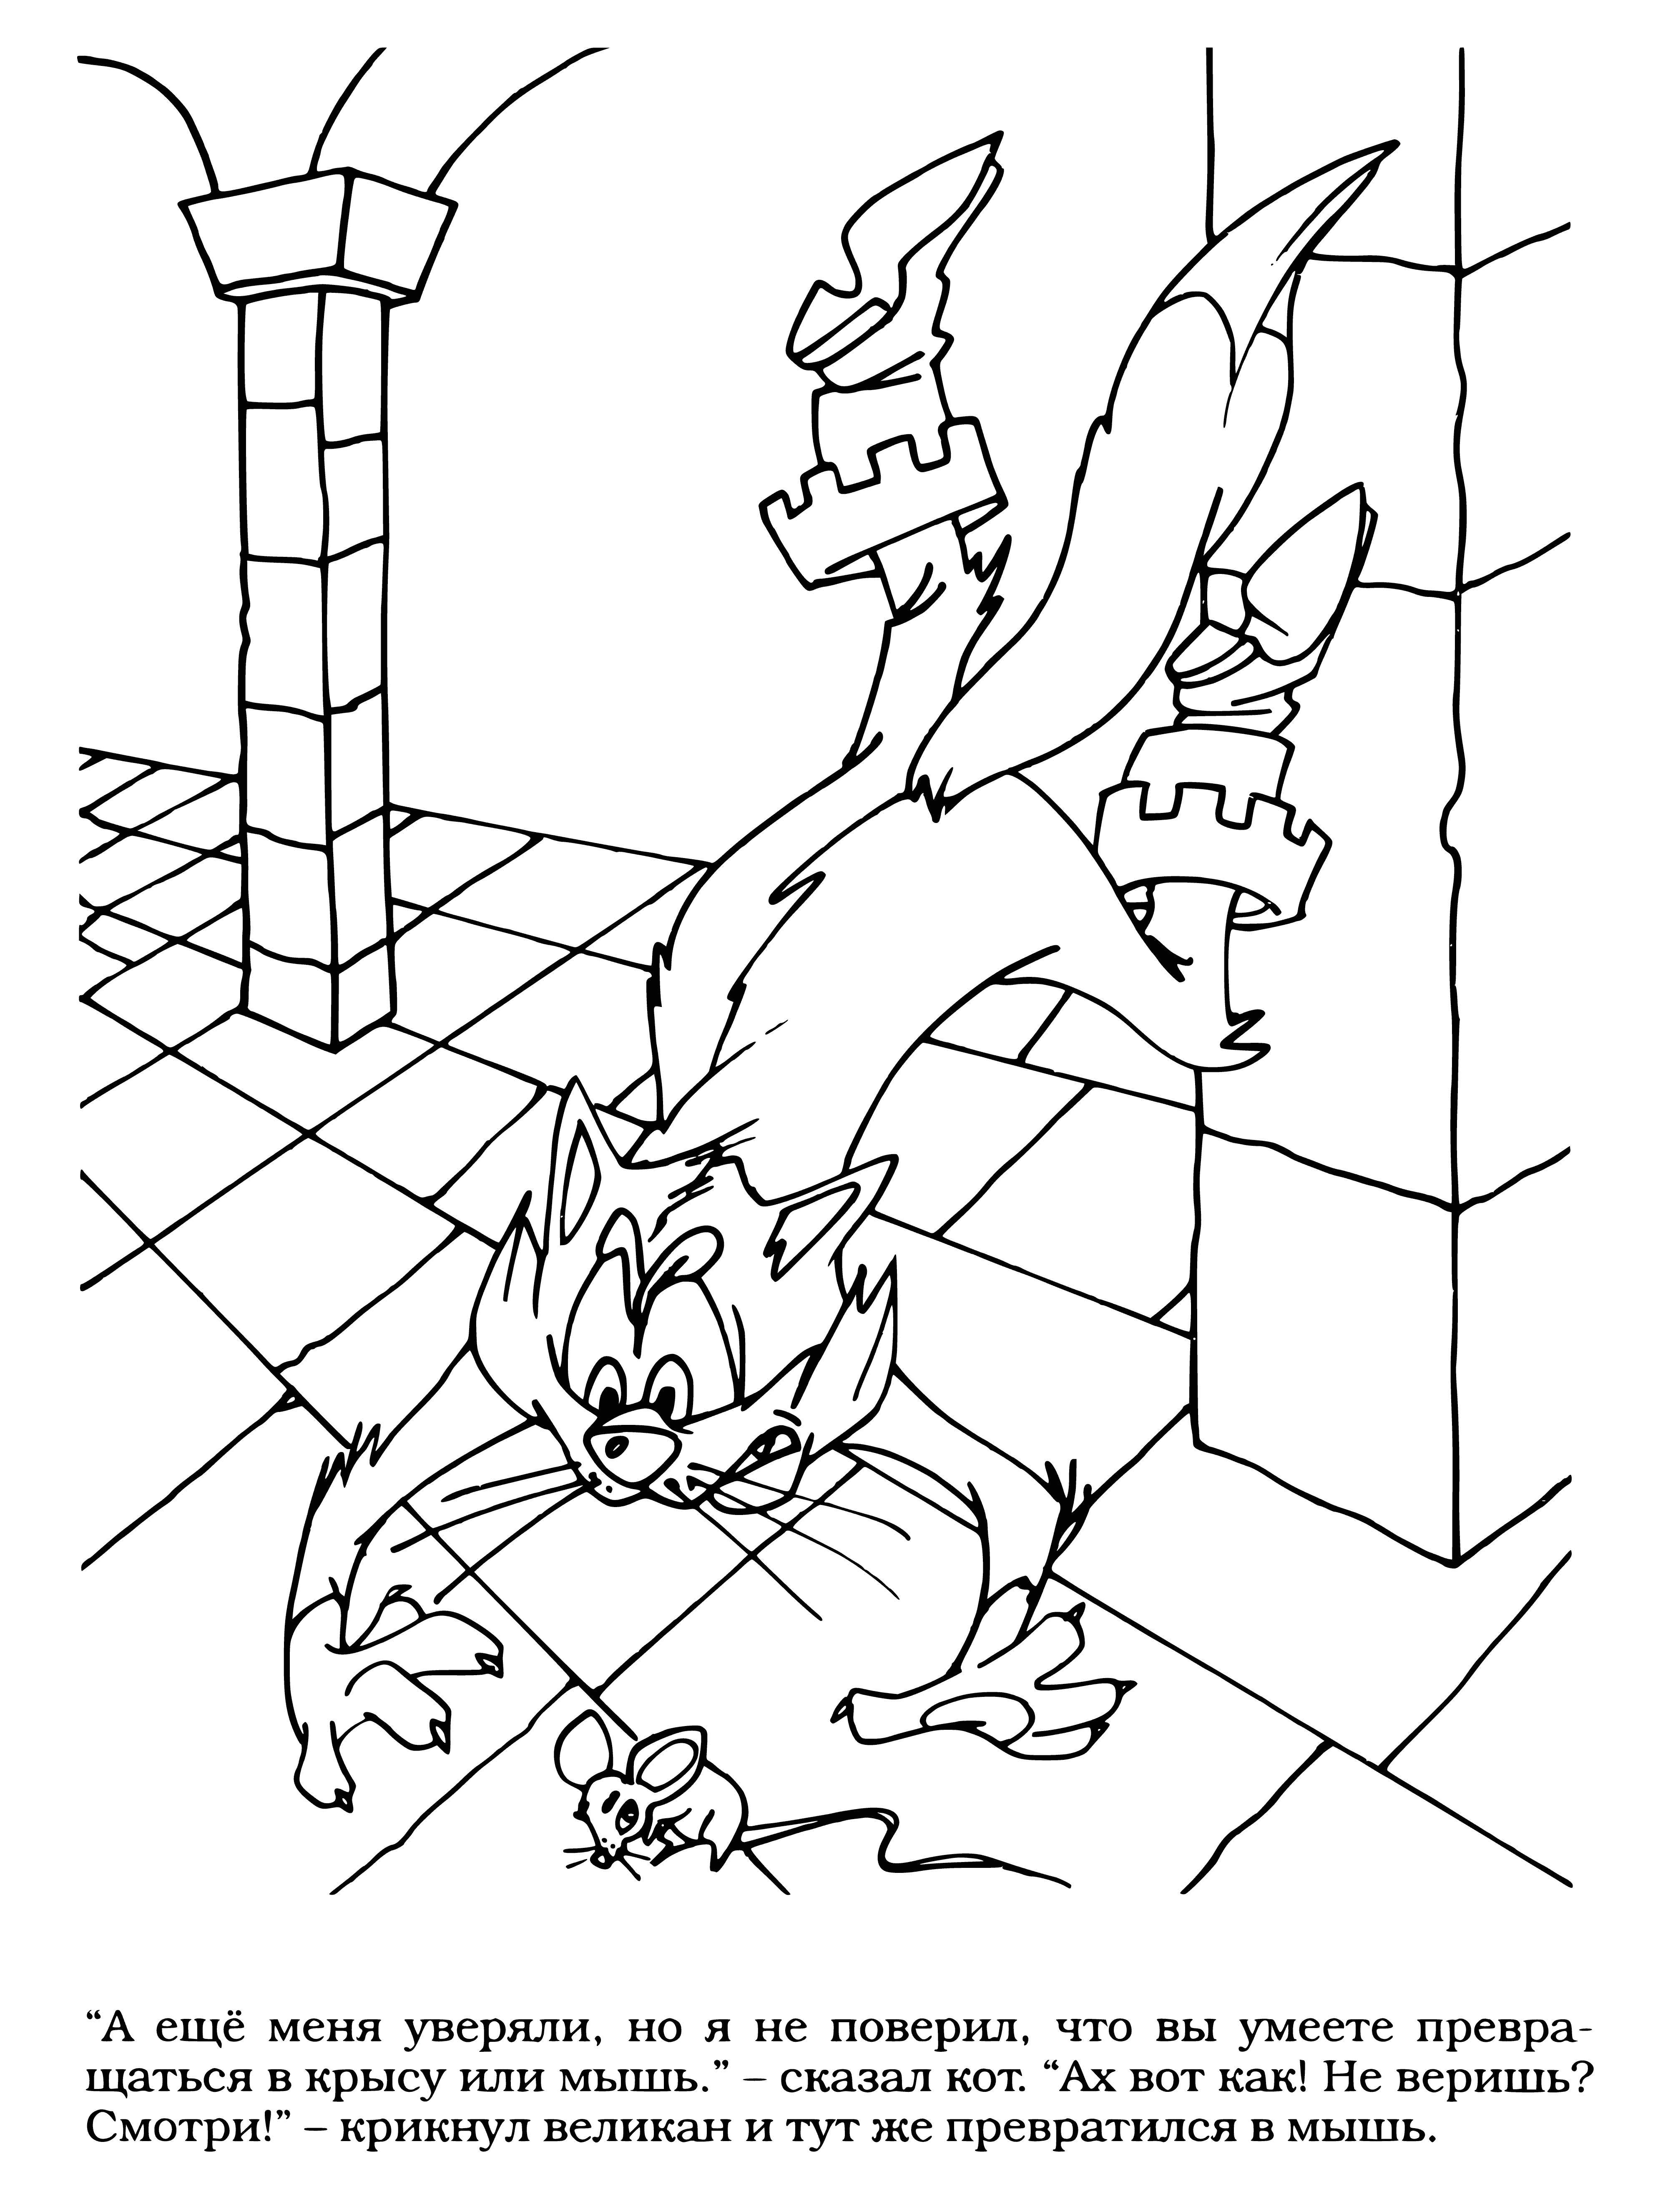 The giant turned into a mouse coloring page